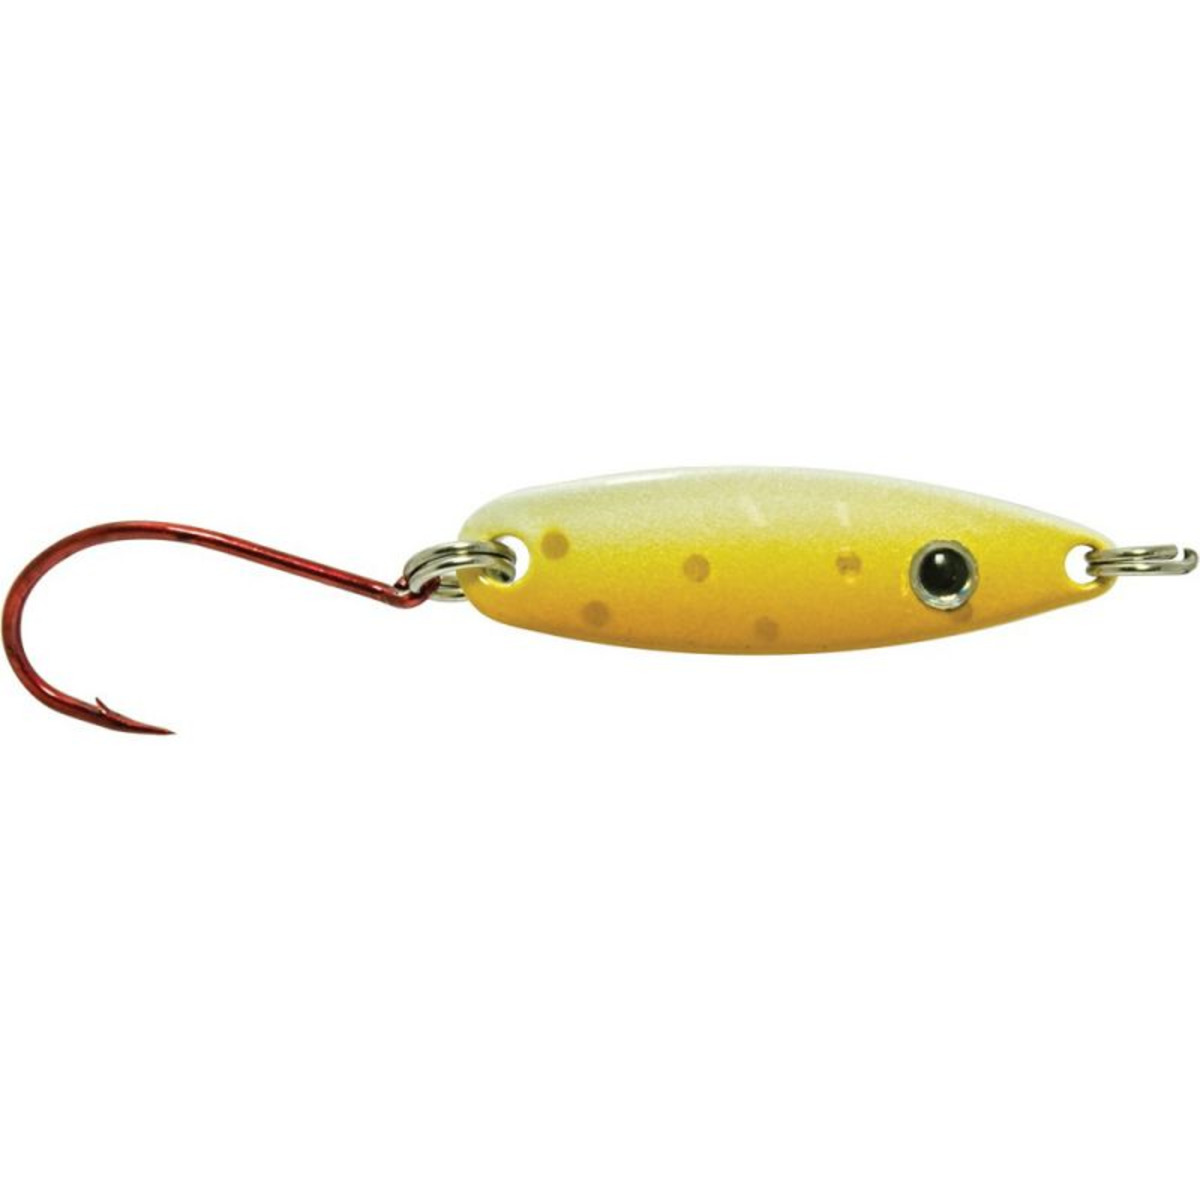 Rapture Silver Trout - 4.0 g - 43 mm - 10 - YT